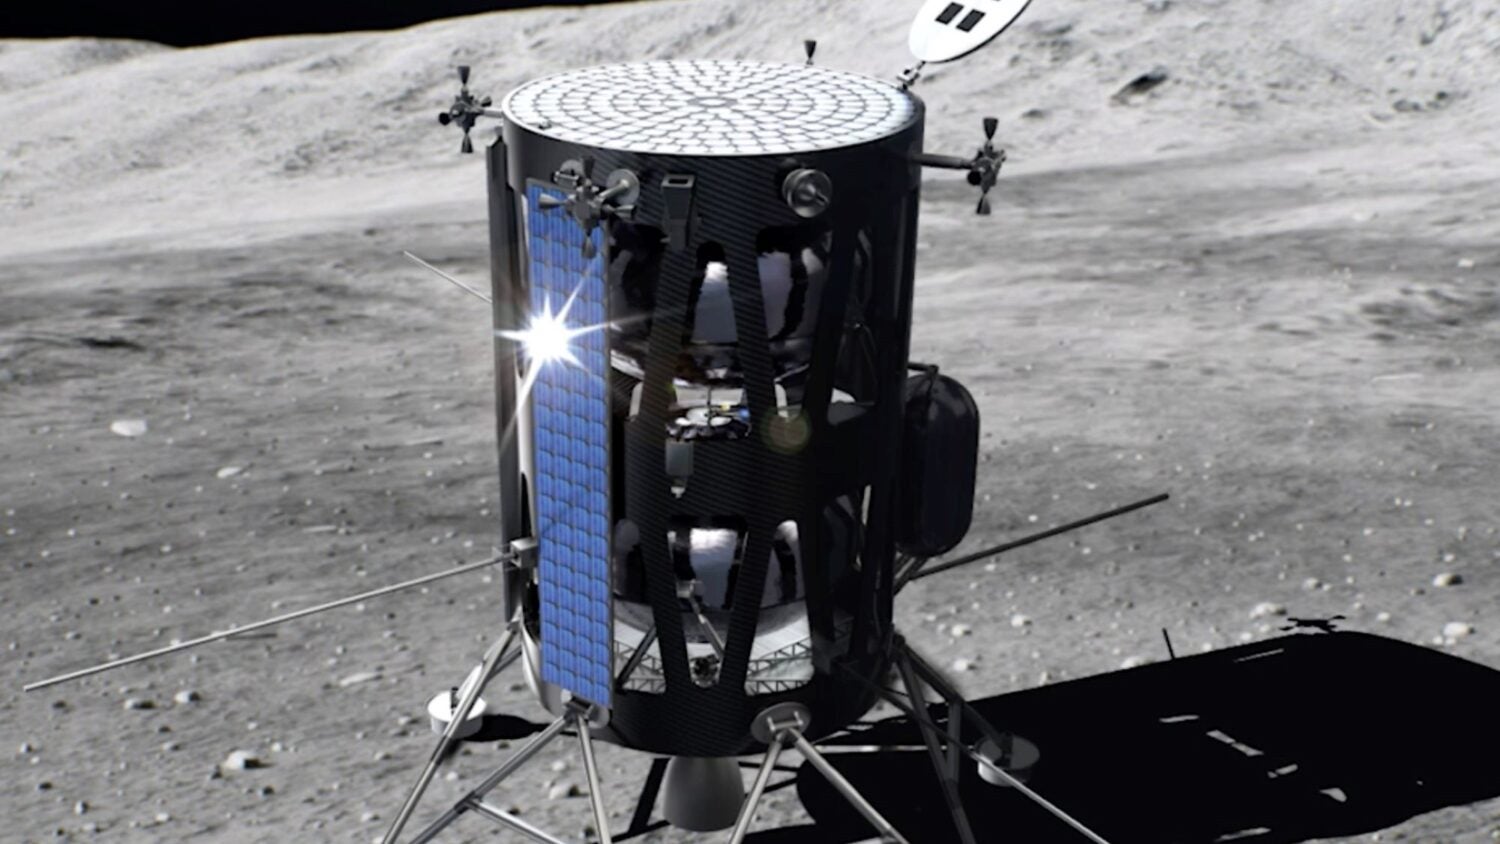 A blue and black spacecraft on the moon's gray surface, in a computer illustration.